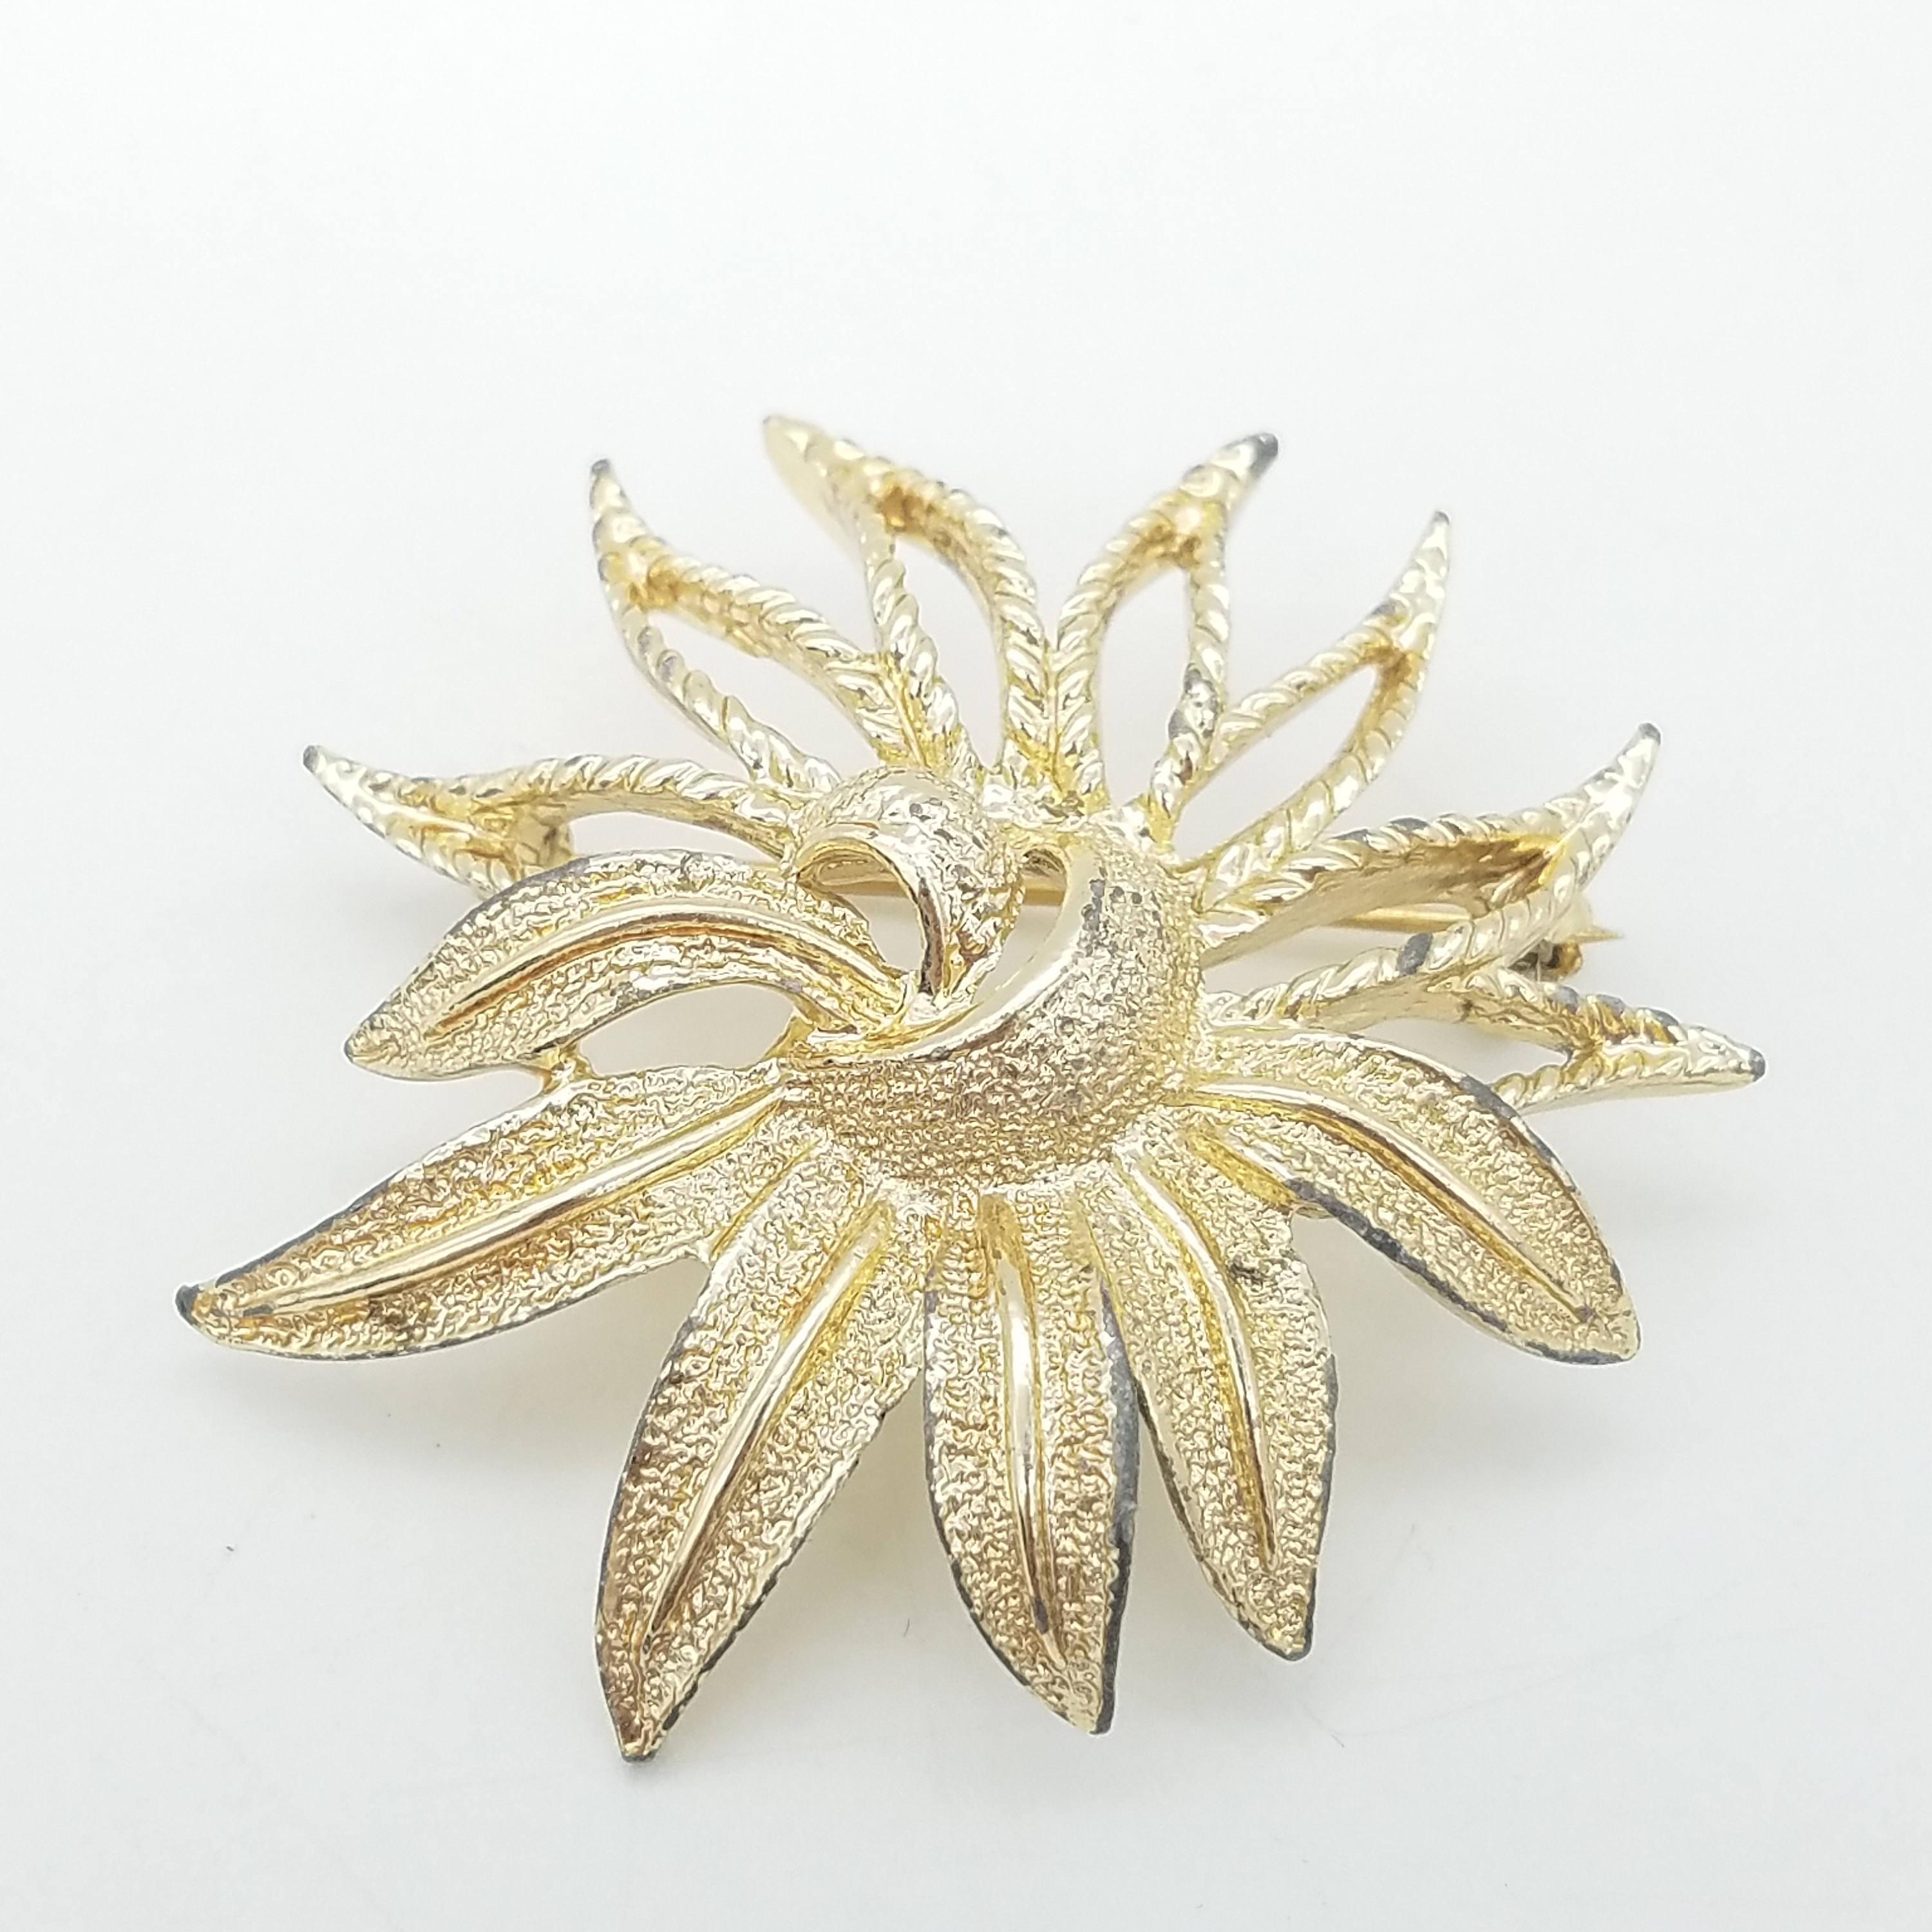 Vintage Gold Tone Floral Brooch Signed Sarah Coventry 